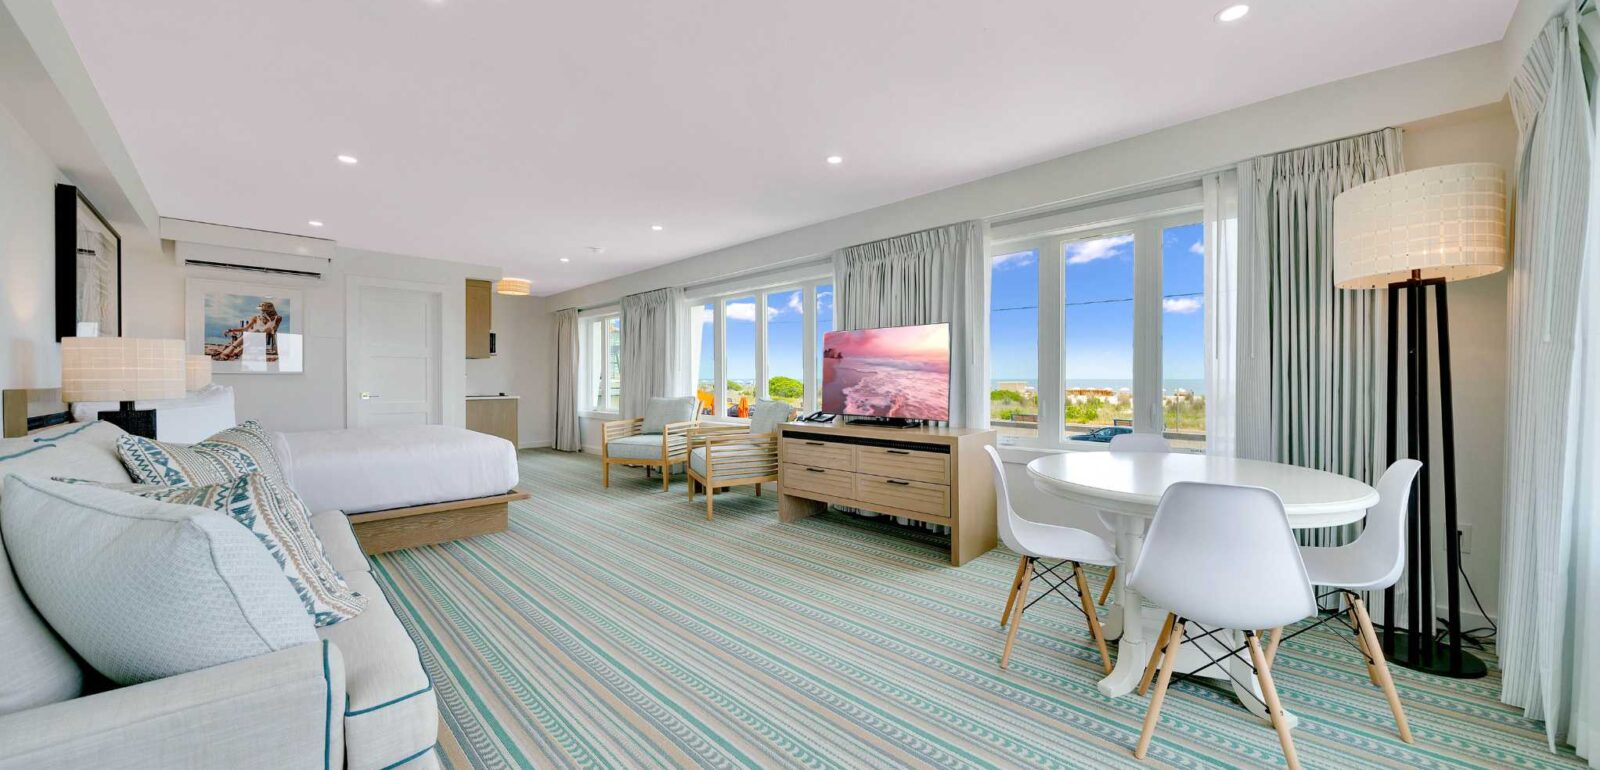 Oceanview King Suite with Kitchenette and Bathroom with Glass Shower at Cape May's Newest Beachfront Hotel - Mahalo Cape May, NJ